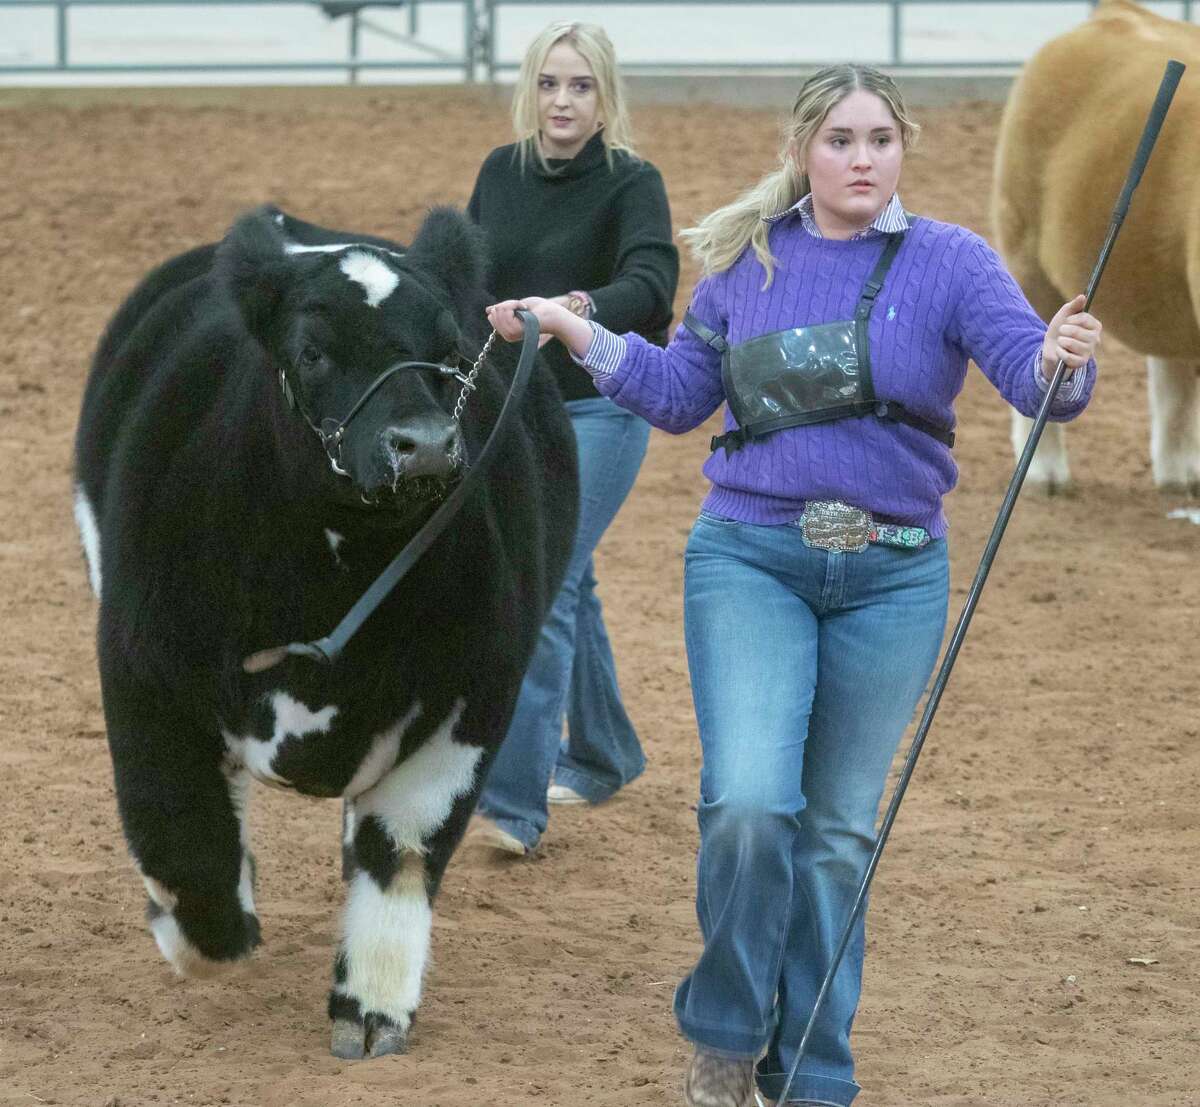 Tatum Bales presents her Grand Champion cross breed steer as she and other area FFA youth show off years of work with their steers 01/14/2022 during the Midland County Livestock Association Show at the Midland County Arena. Tim Fischer/Reporter-Telegram